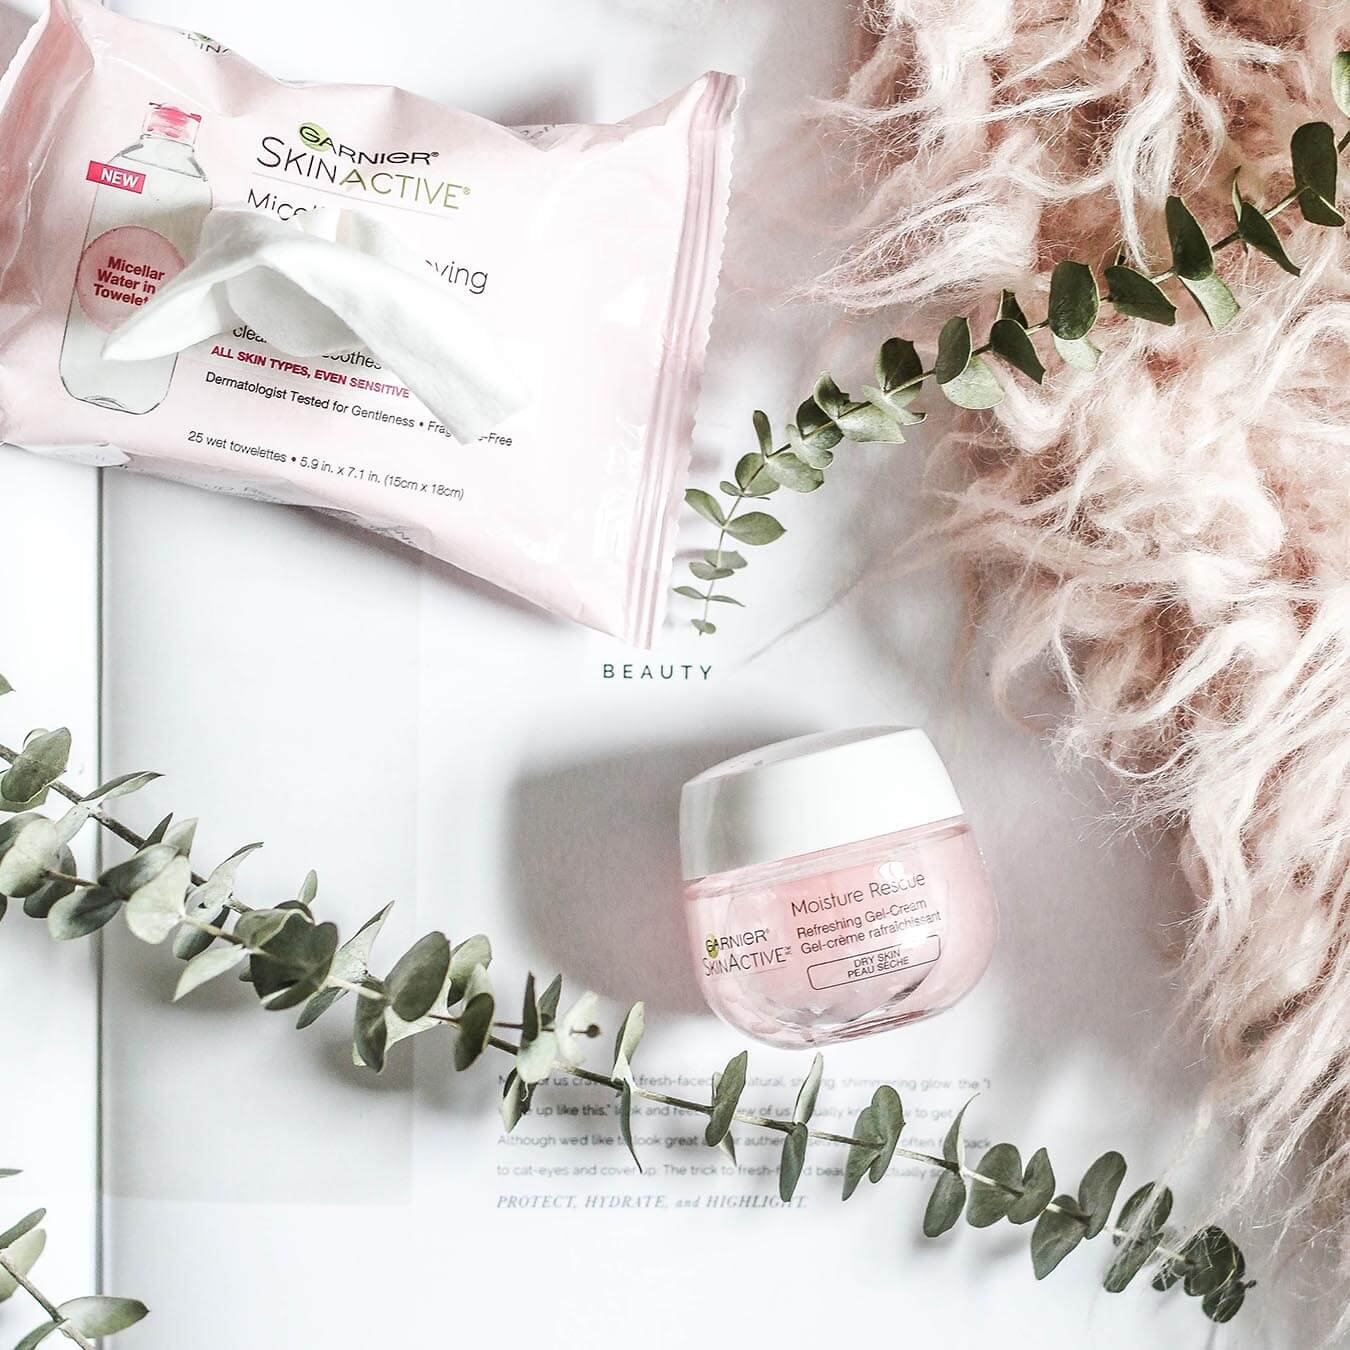 Garnier SkinActive Moisture Rescue Refreshing Gel-Cream laying on its side and an opened SkinActive Micellar Makeup Removing Towelettes All-in-1 laying on an open magazine partially covered by eucalyptus leaves and a pink shag rug revealing the word "beauty" on the page.